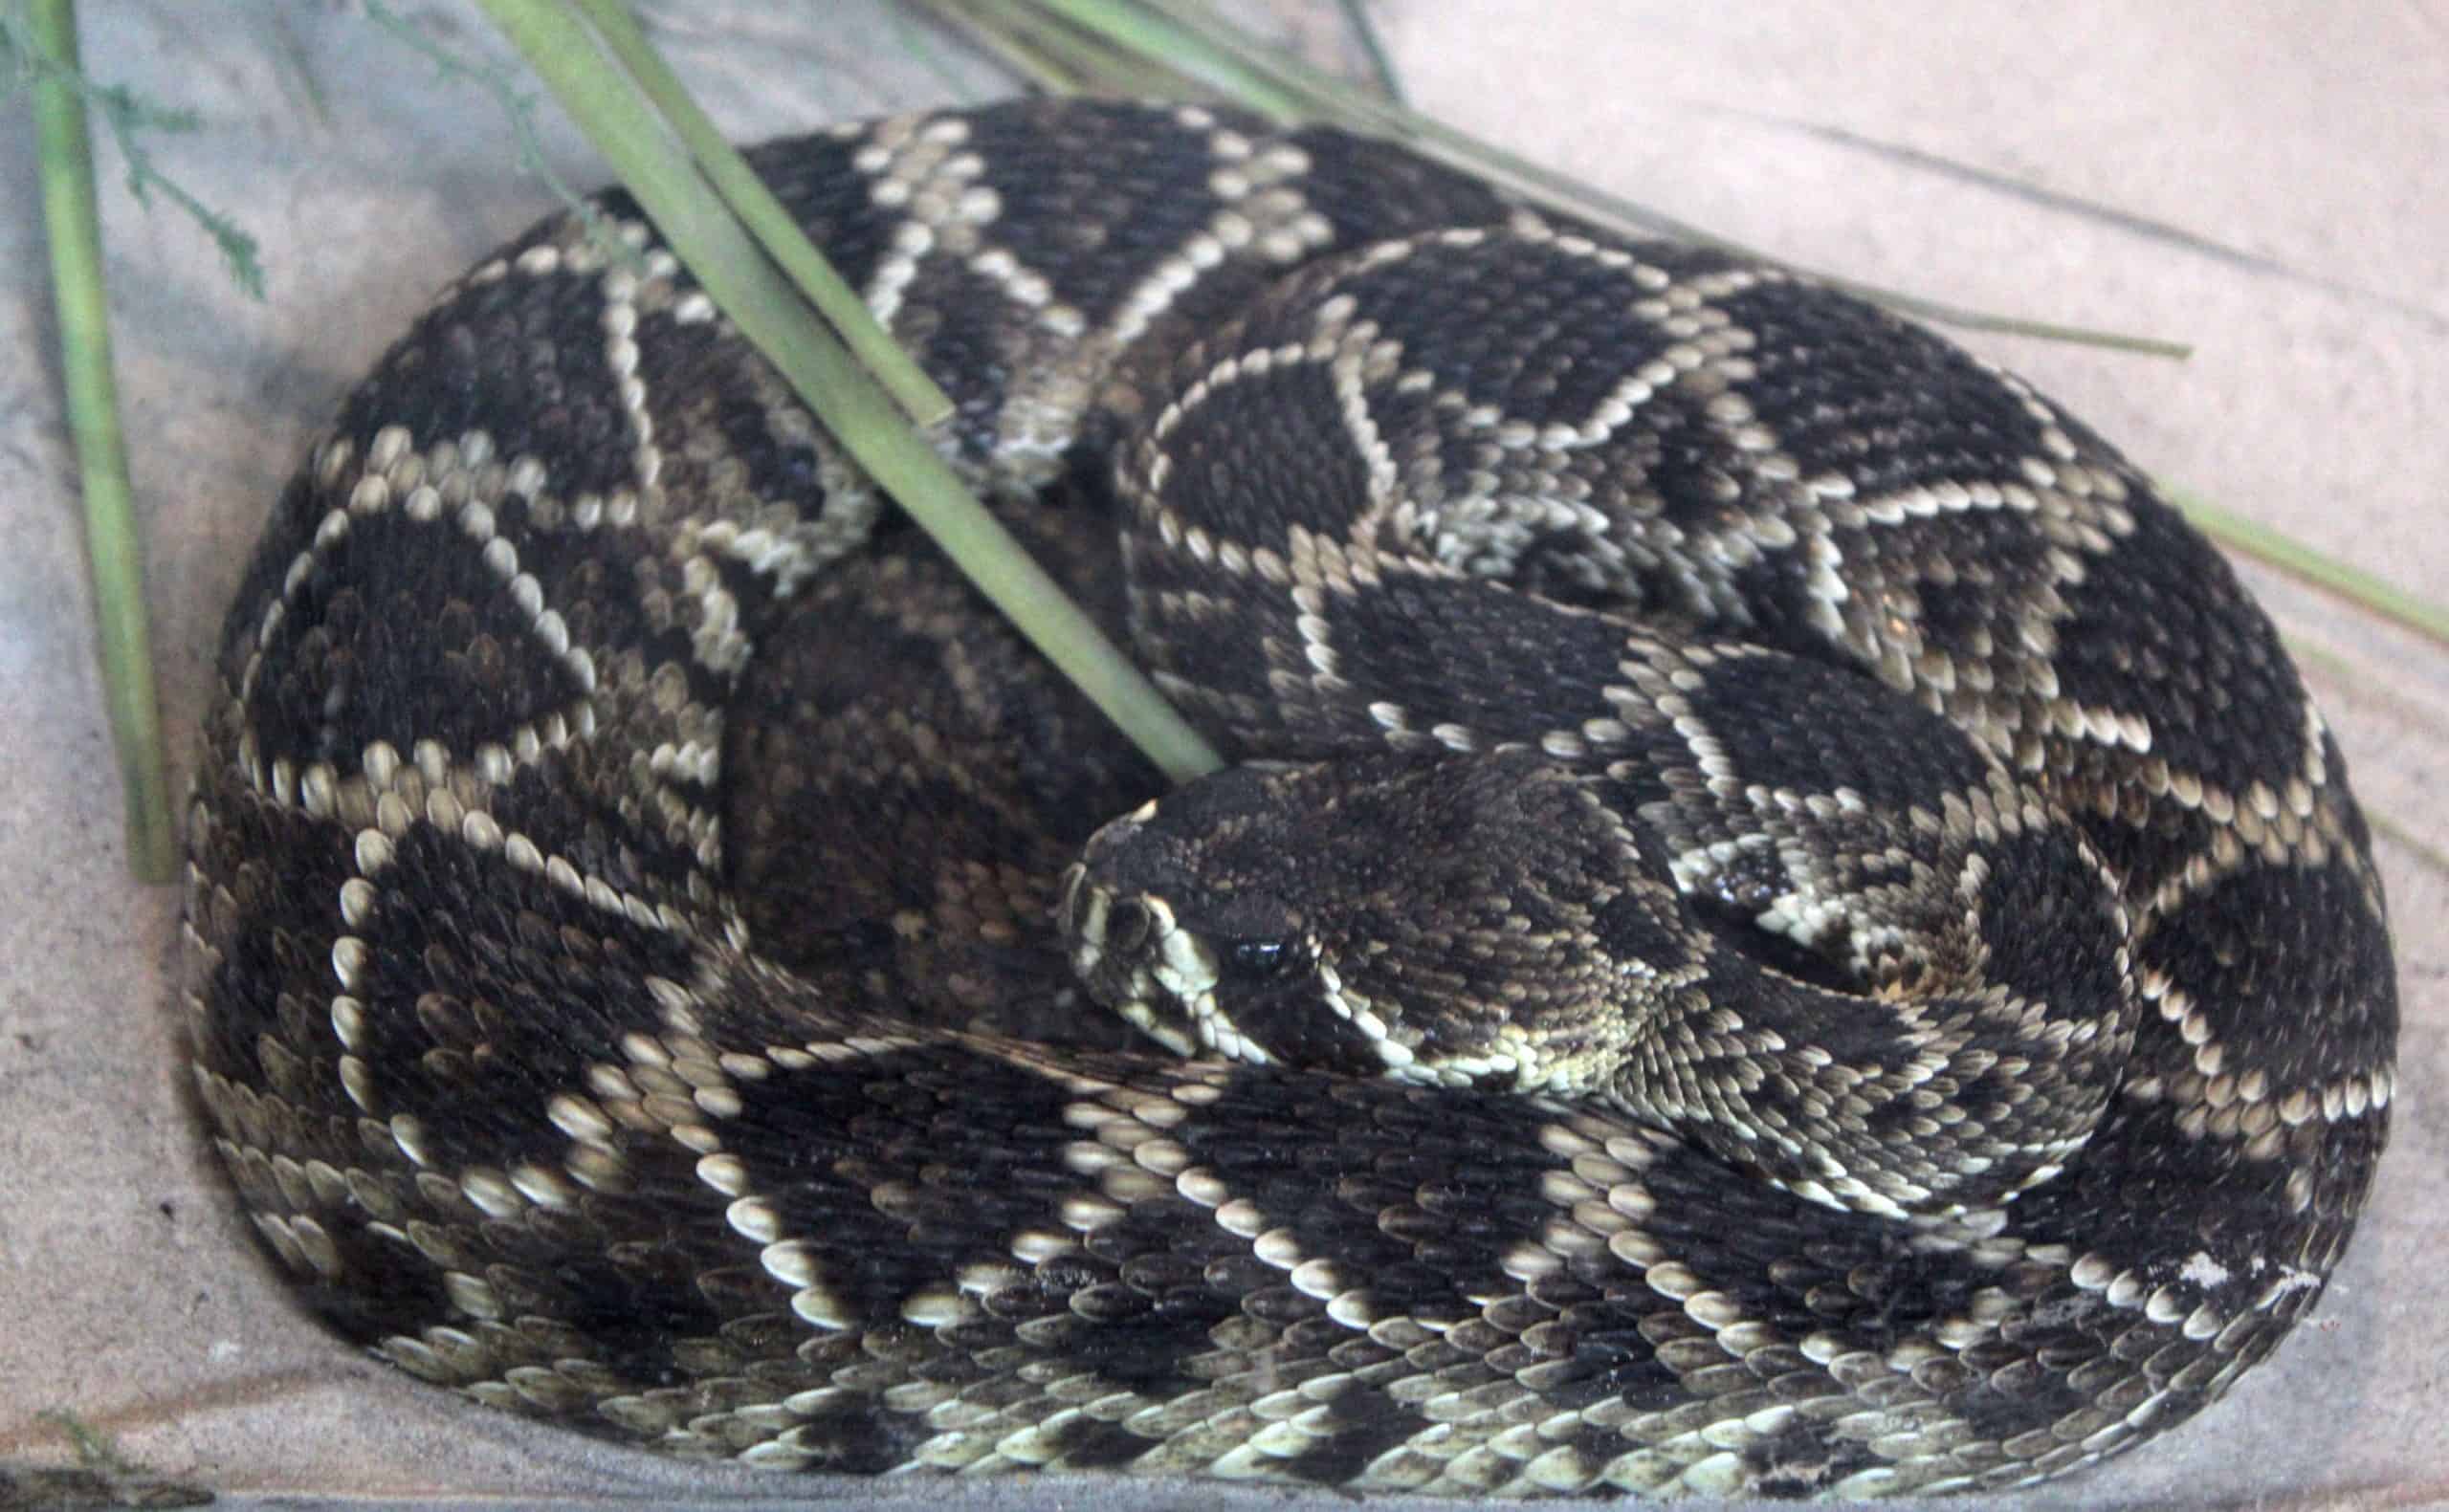 Rattlesnake in the Snakes of Florida Exhibit